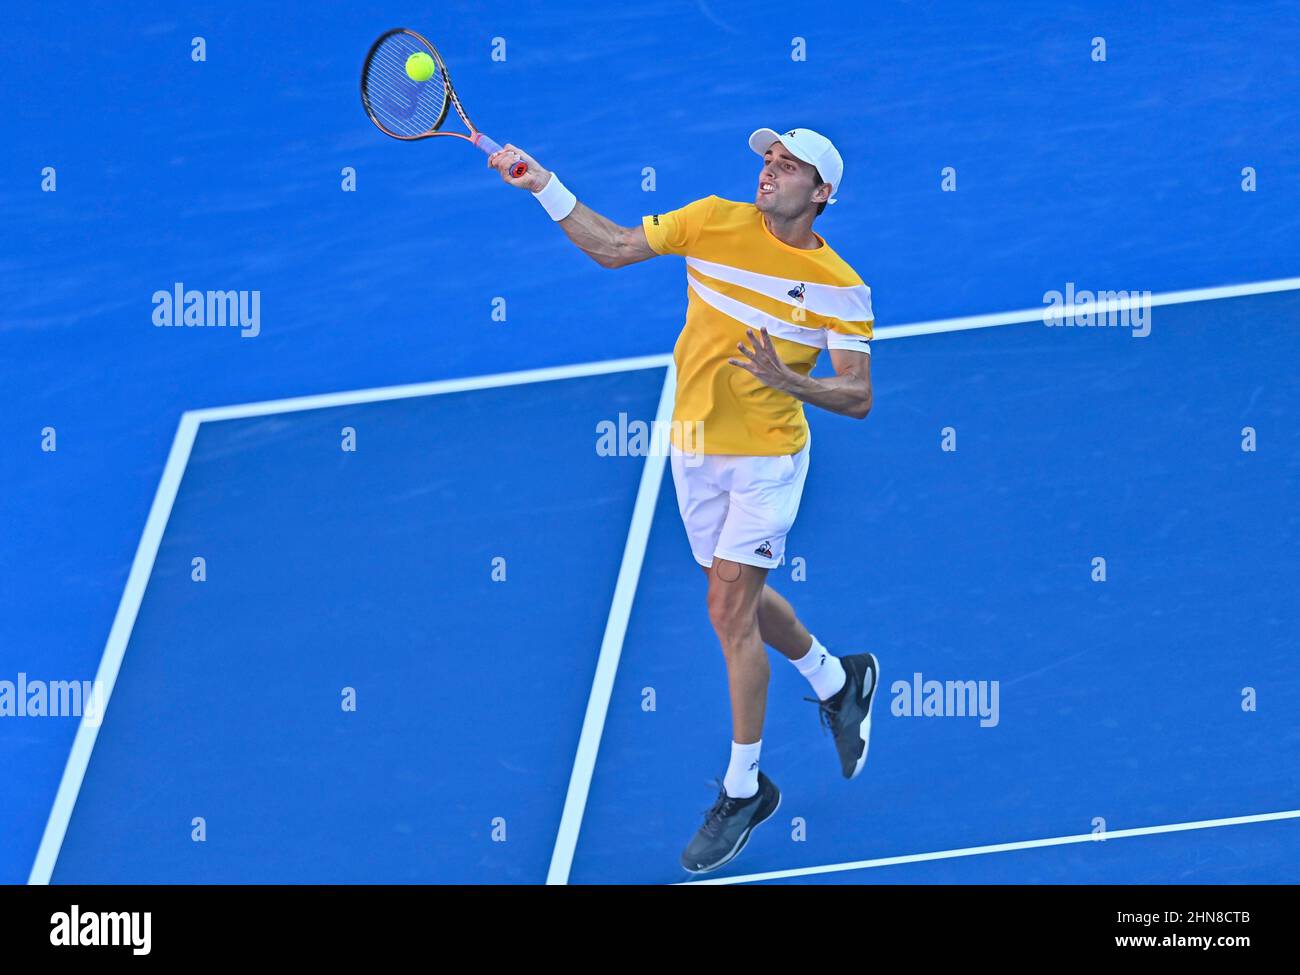 Doha, Qatar. 14th Feb, 2022. Christopher O'Connell of Australia returns the  ball to Alex Molcan of Slovakia during the first round of ATP Qatar Open  tennis match in Doha, capital of Qatar,